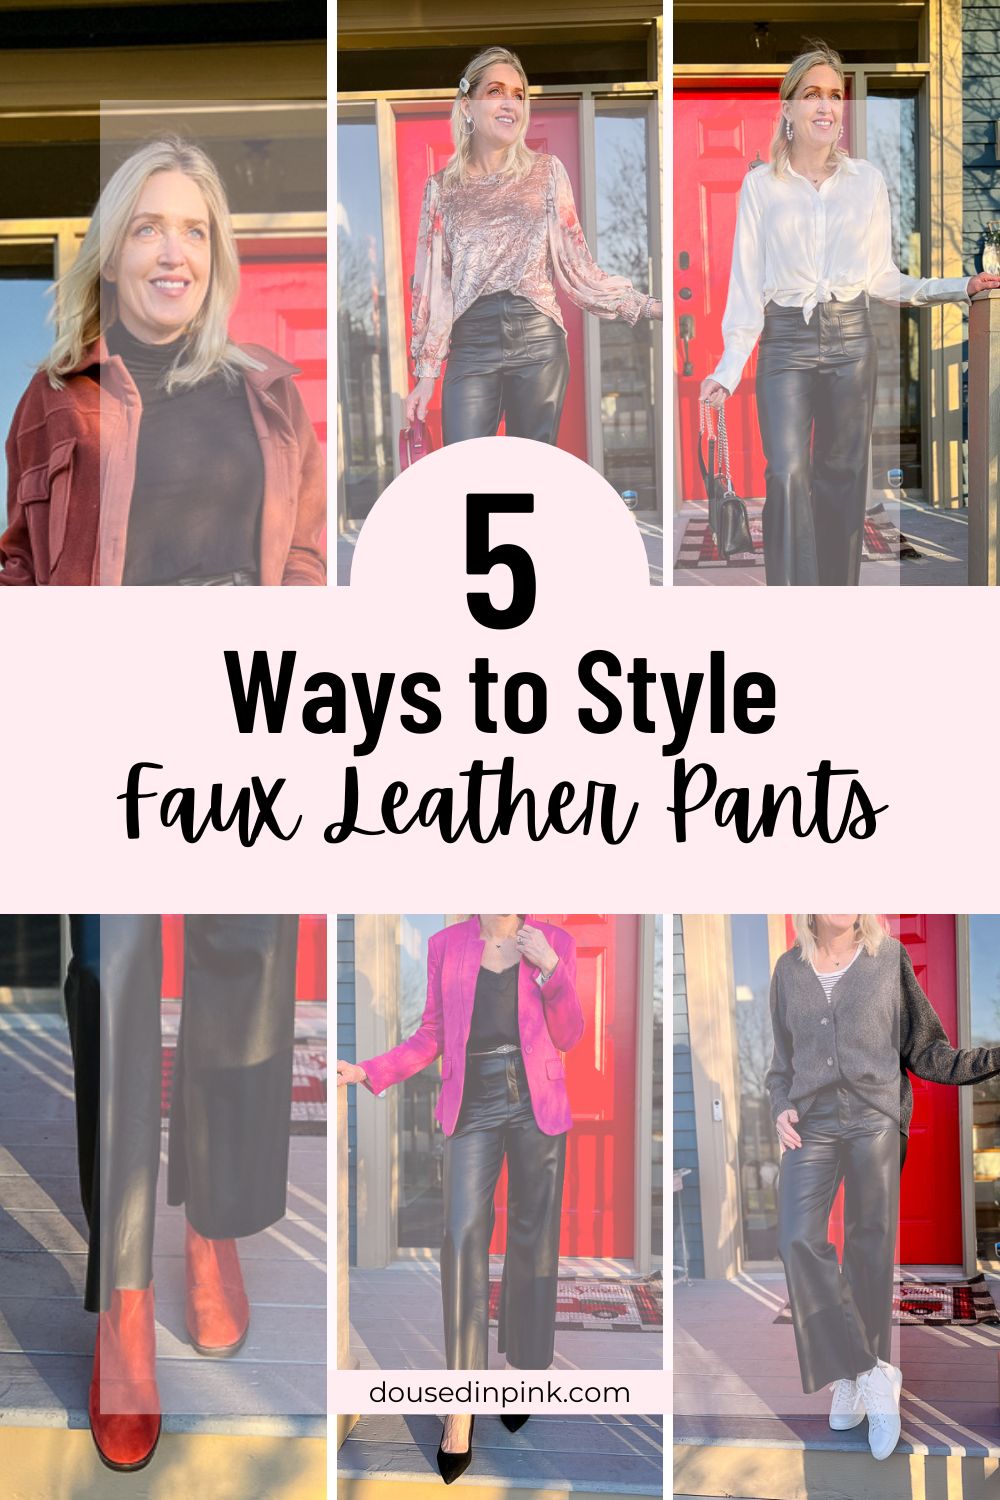 Category: Leather pants from Monday to Friday. Pick a fave! Share and save  for leather pants outfit inspiration 😉💗 #leatherpants